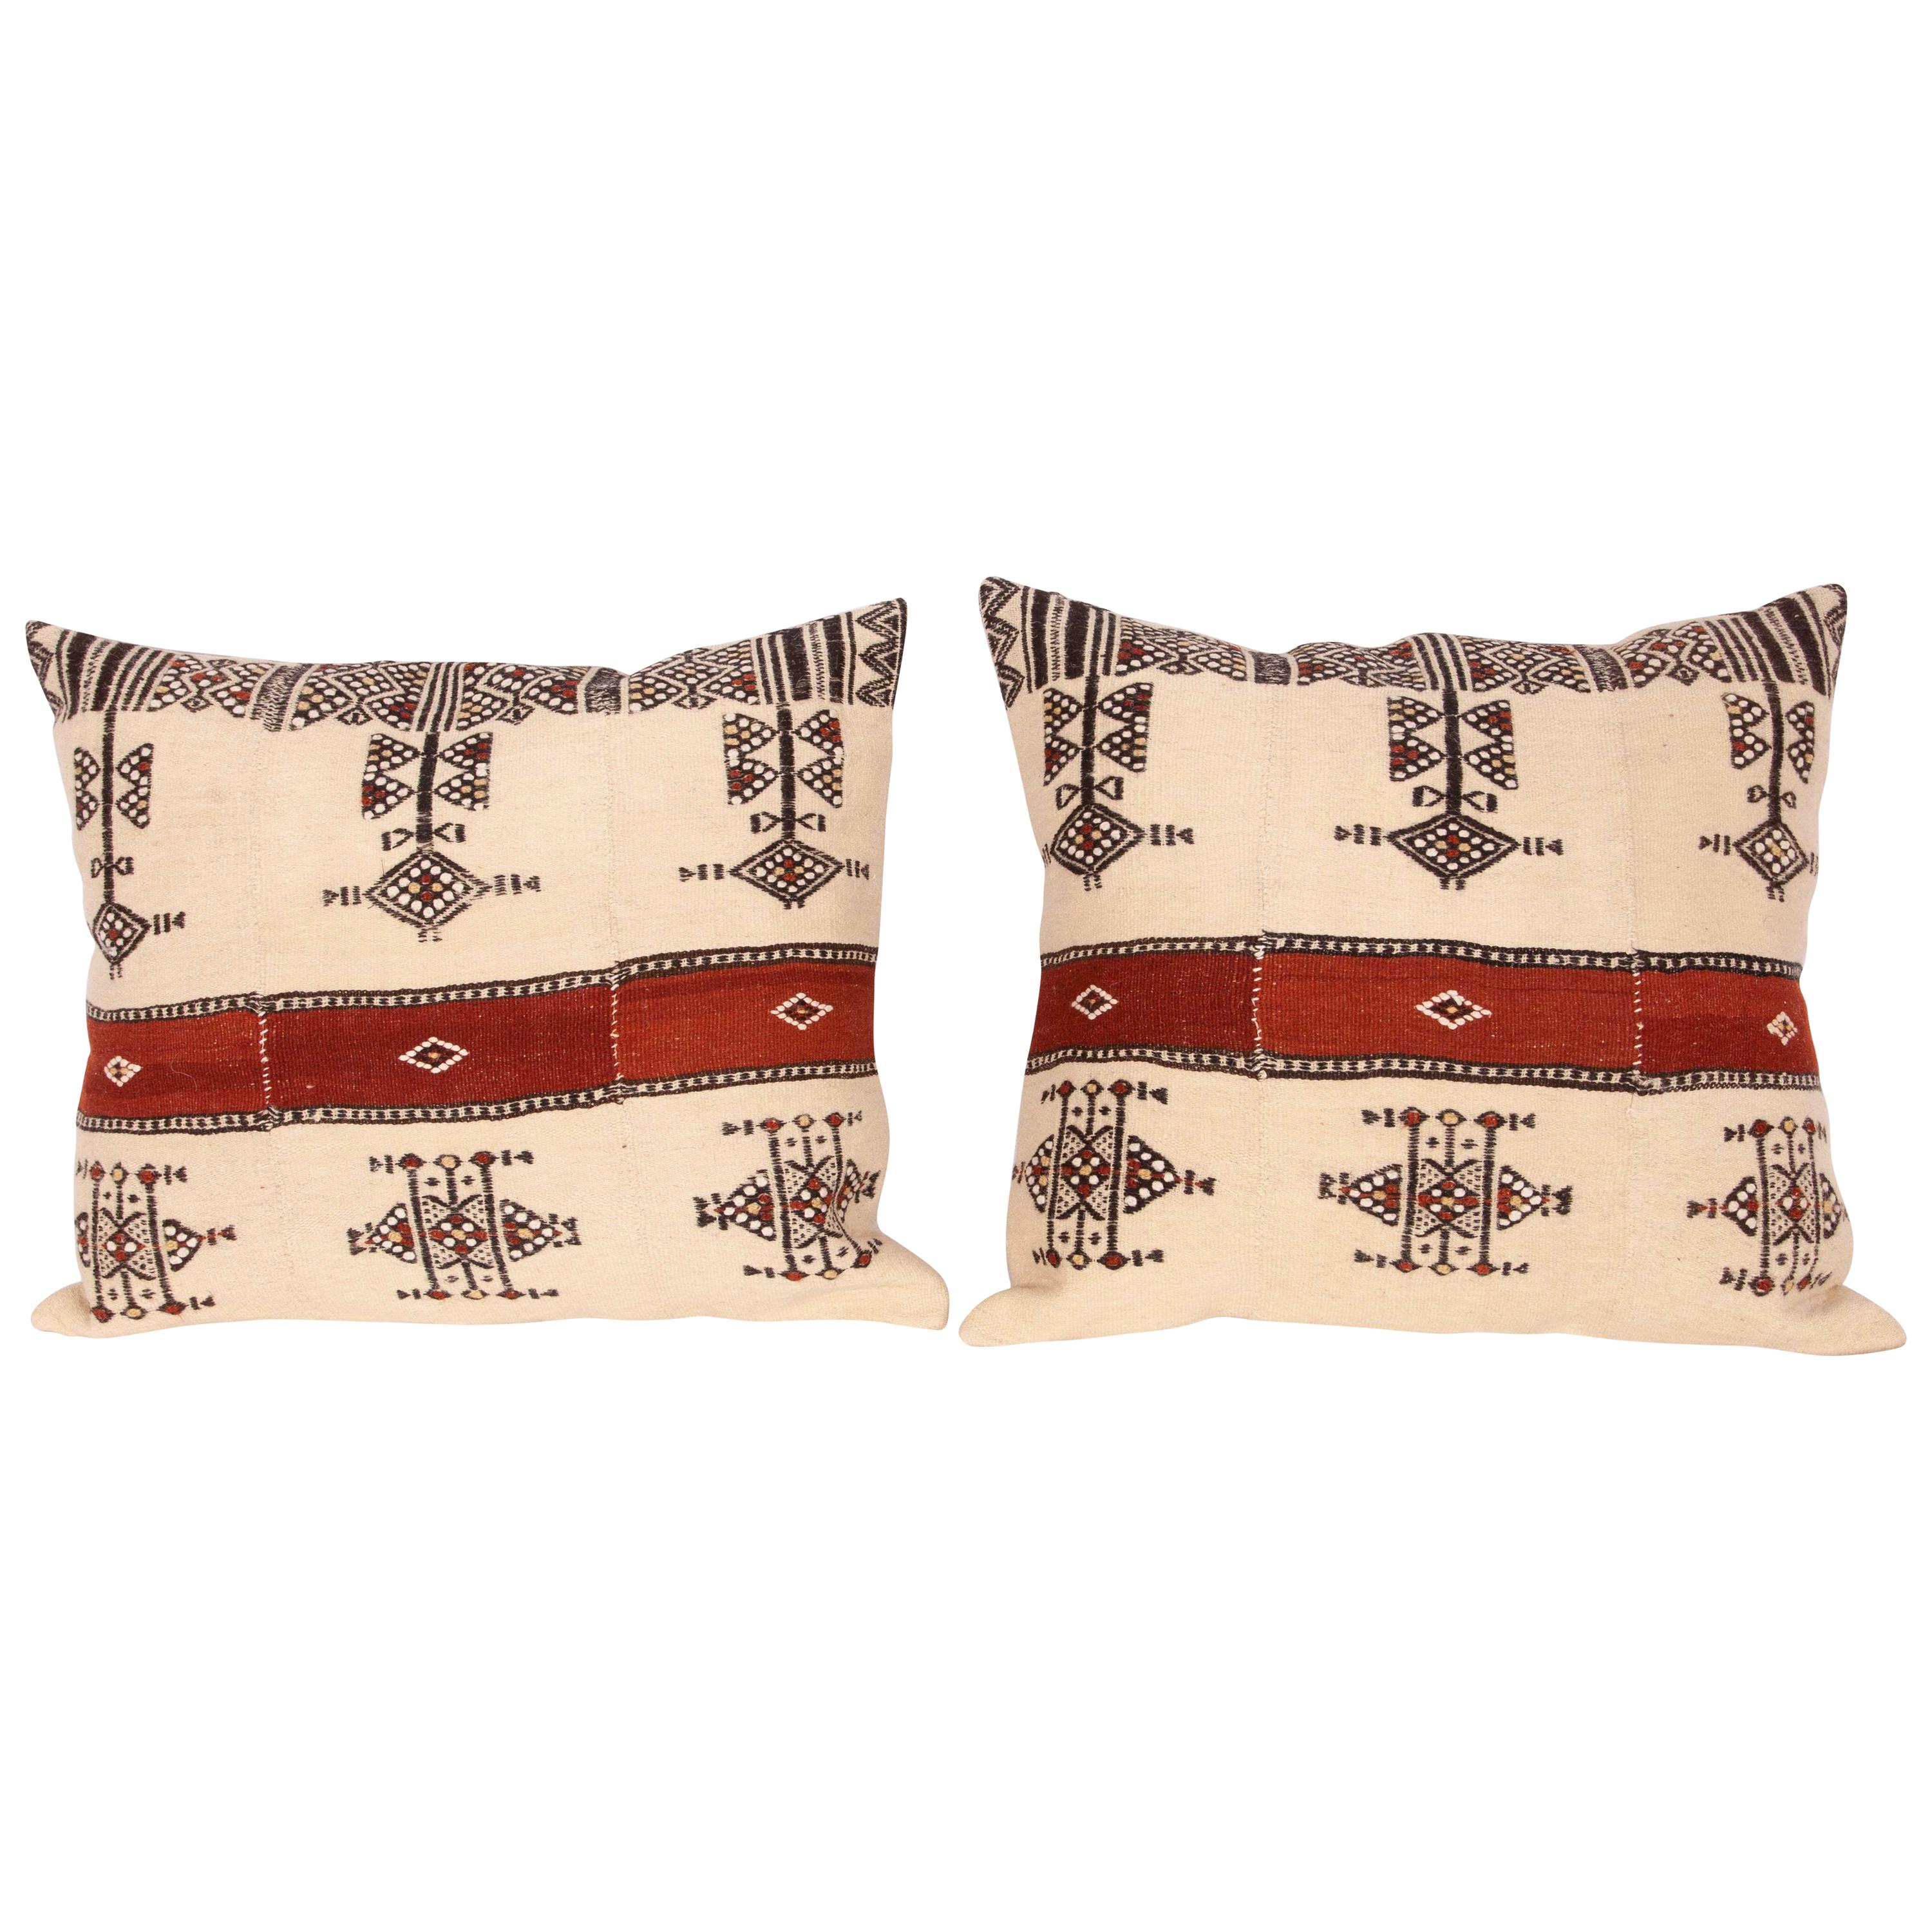 Fulani Pillow Covers from Mali Africa Mid-20th Century